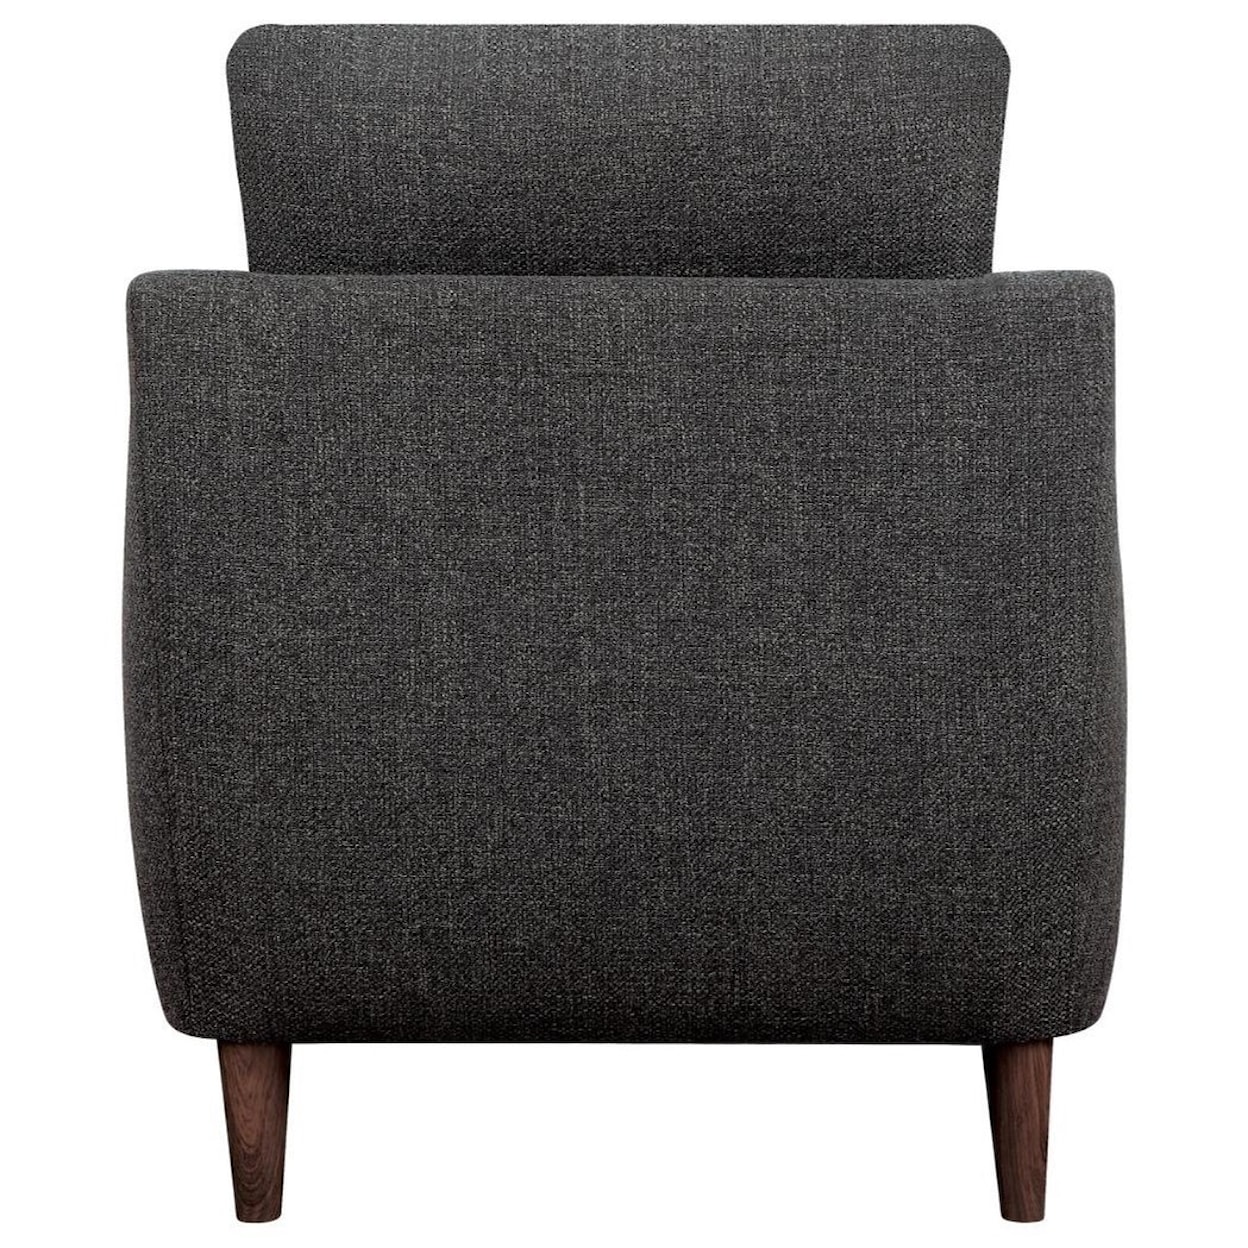 Homelegance Furniture Cagle Accent Chair